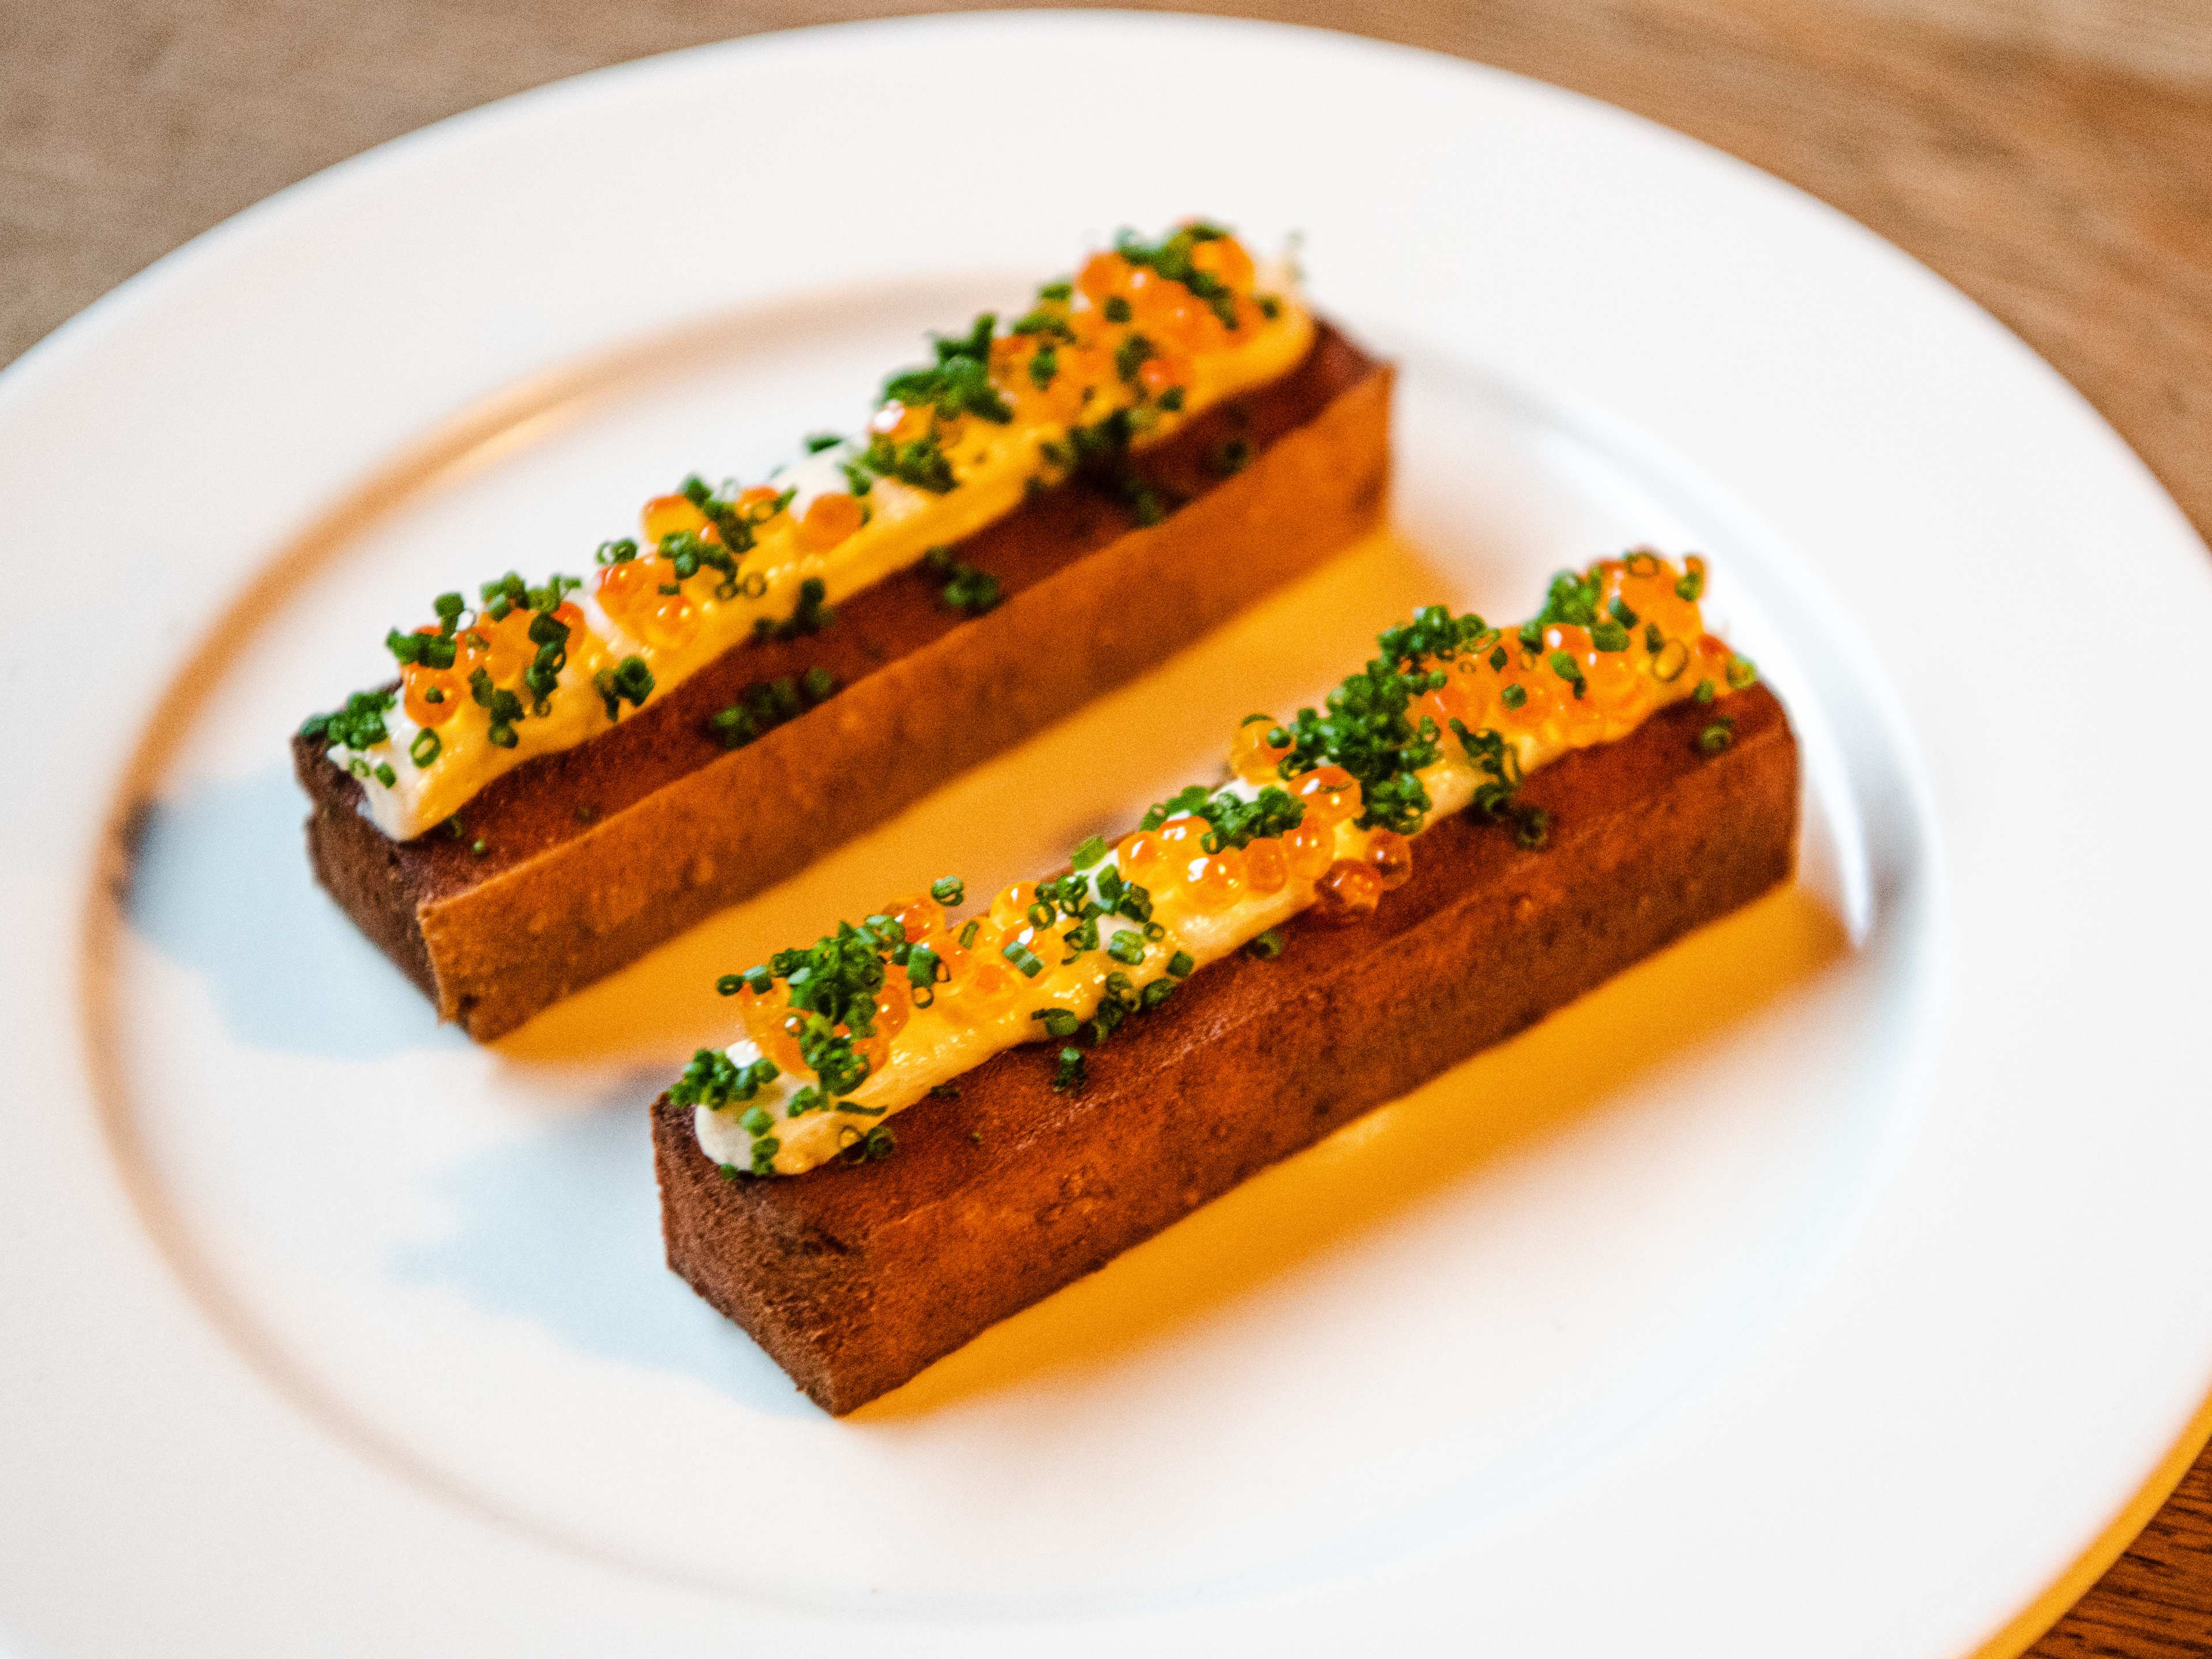 The chickpea panisse from Planque.